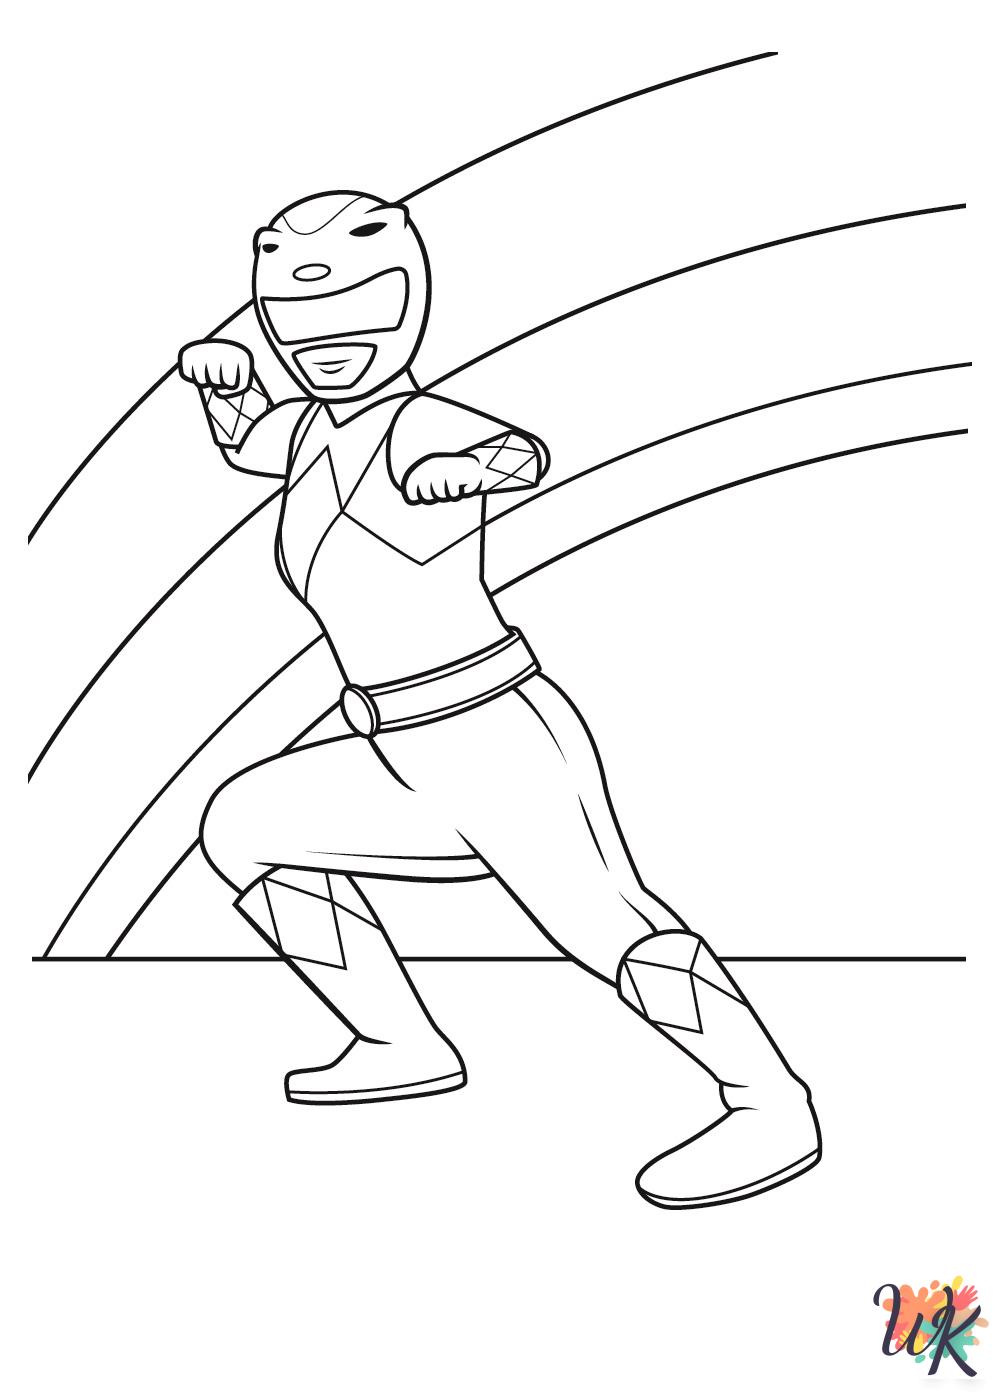 Power Rangers coloring pages for adults easy